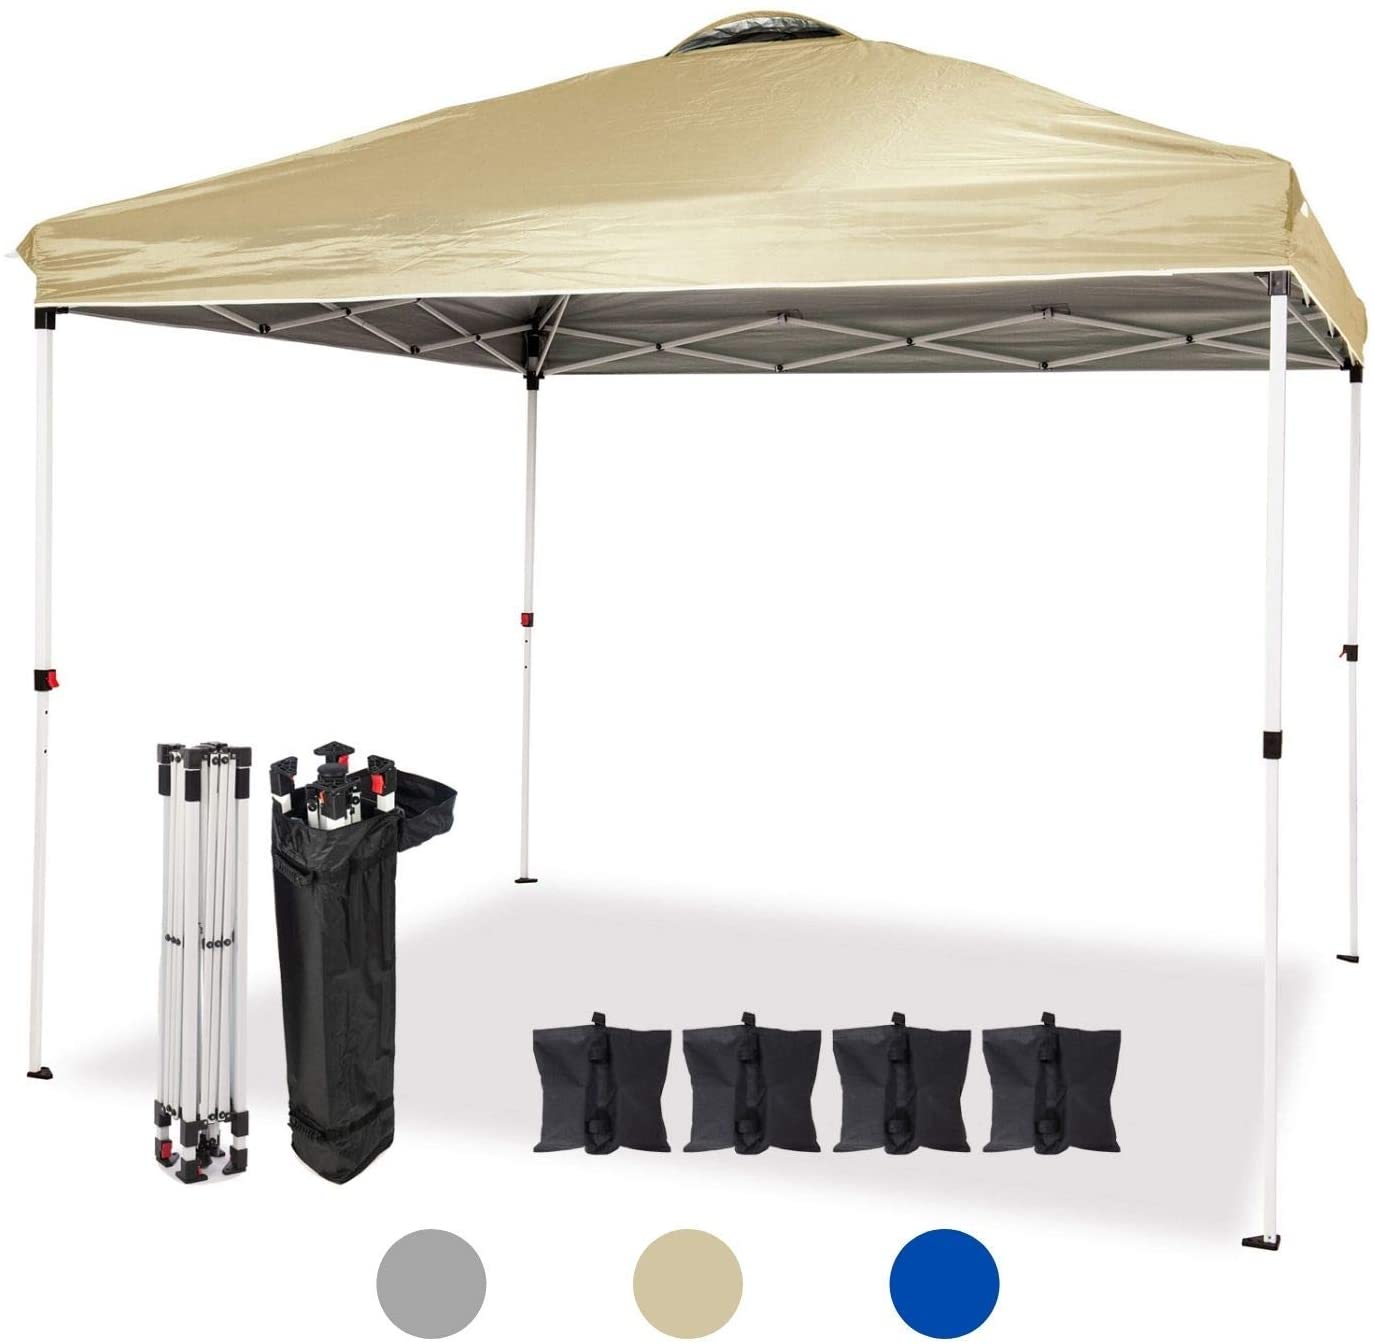 3m x 3m Heavy Duty Pop Up Outdoor Garden Shelter PVC Coated Choice of Colours Grey Travel Bag and 4 Leg Weight Bags Dawsons Living Waterproof Premium One Touch Garden Gazebo